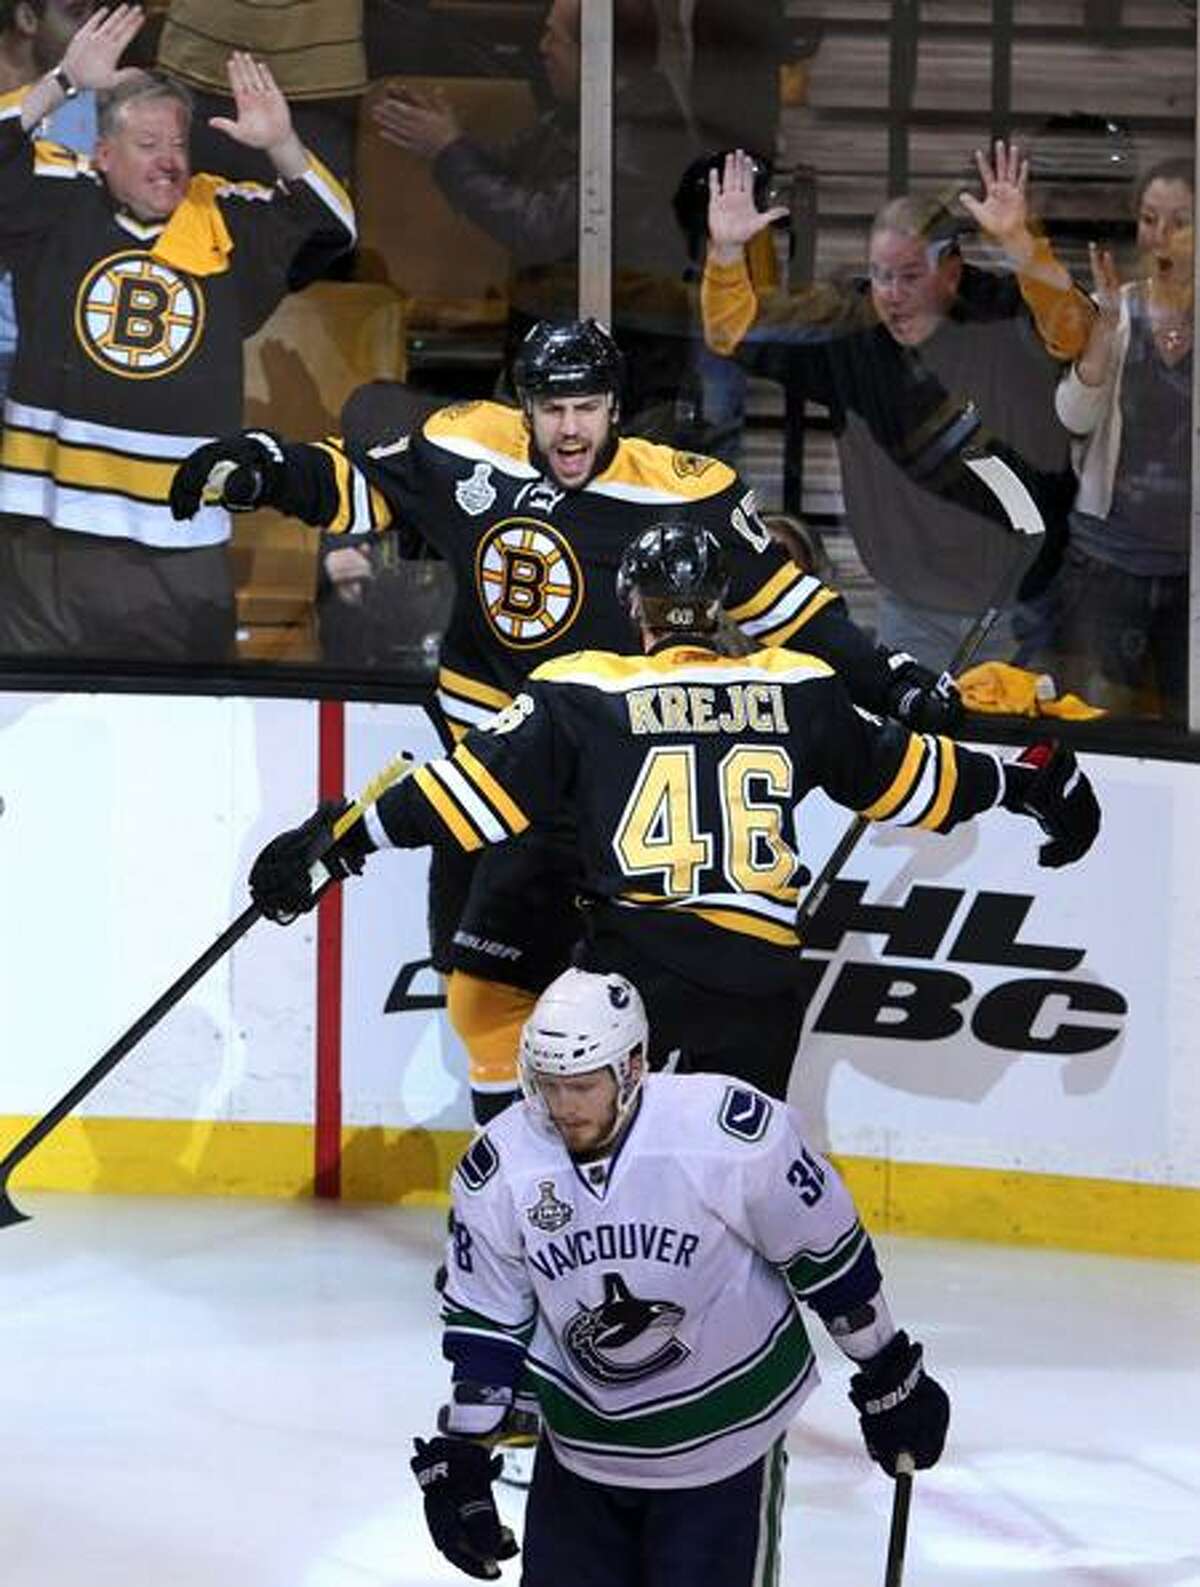 Mark Recchi on the Boston Bruins 2011 Stanley Cup victory; return of hockey